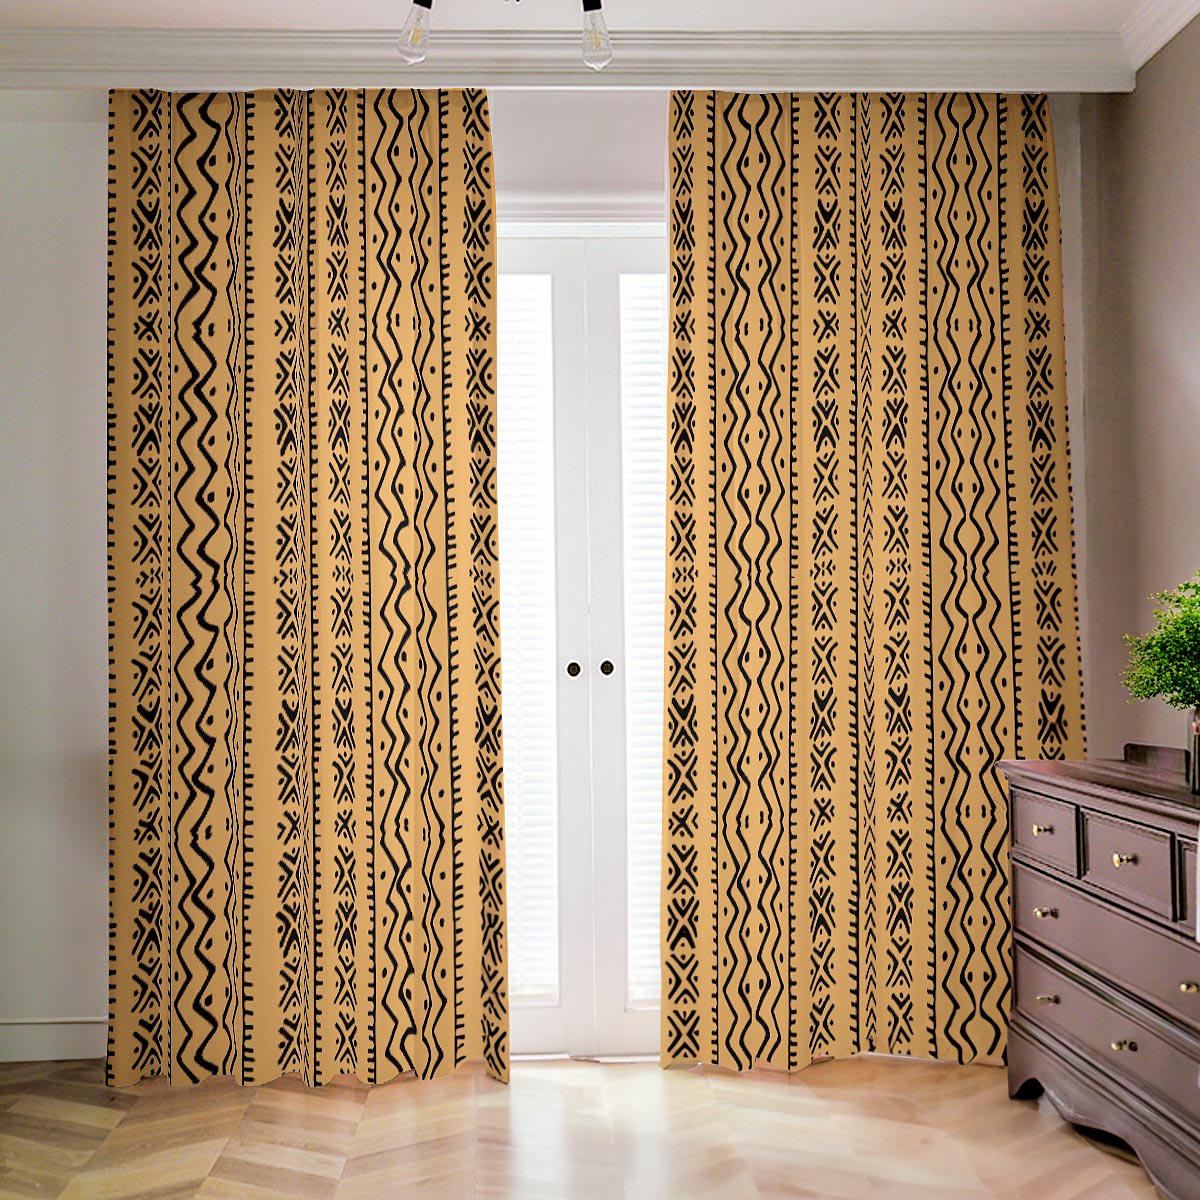 Golden Blackout Curtain in African Mudcloth Print